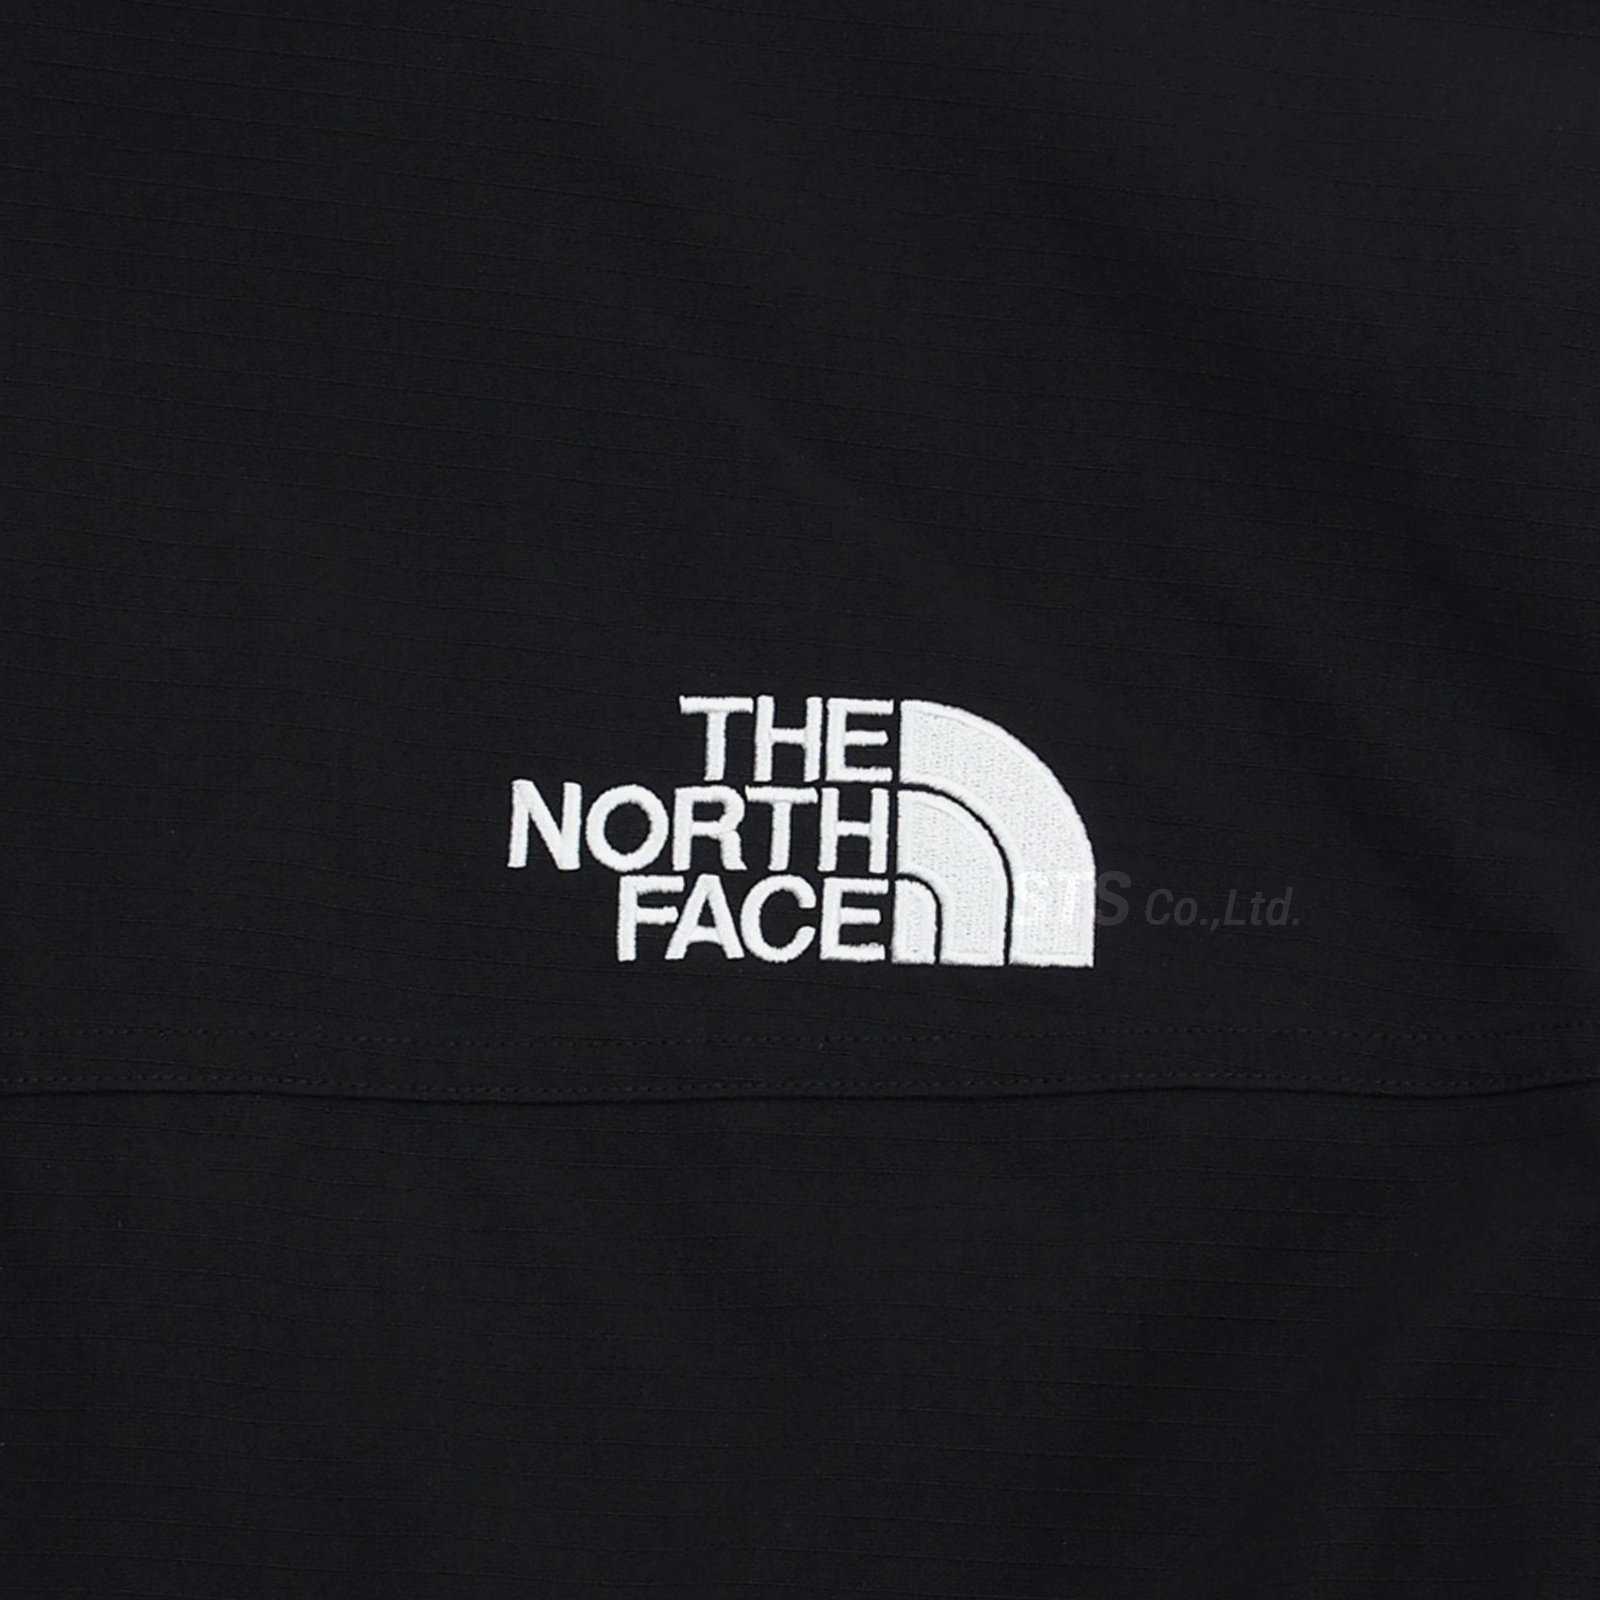 Supreme/The North Face Expedition Jacket - ParkSIDER